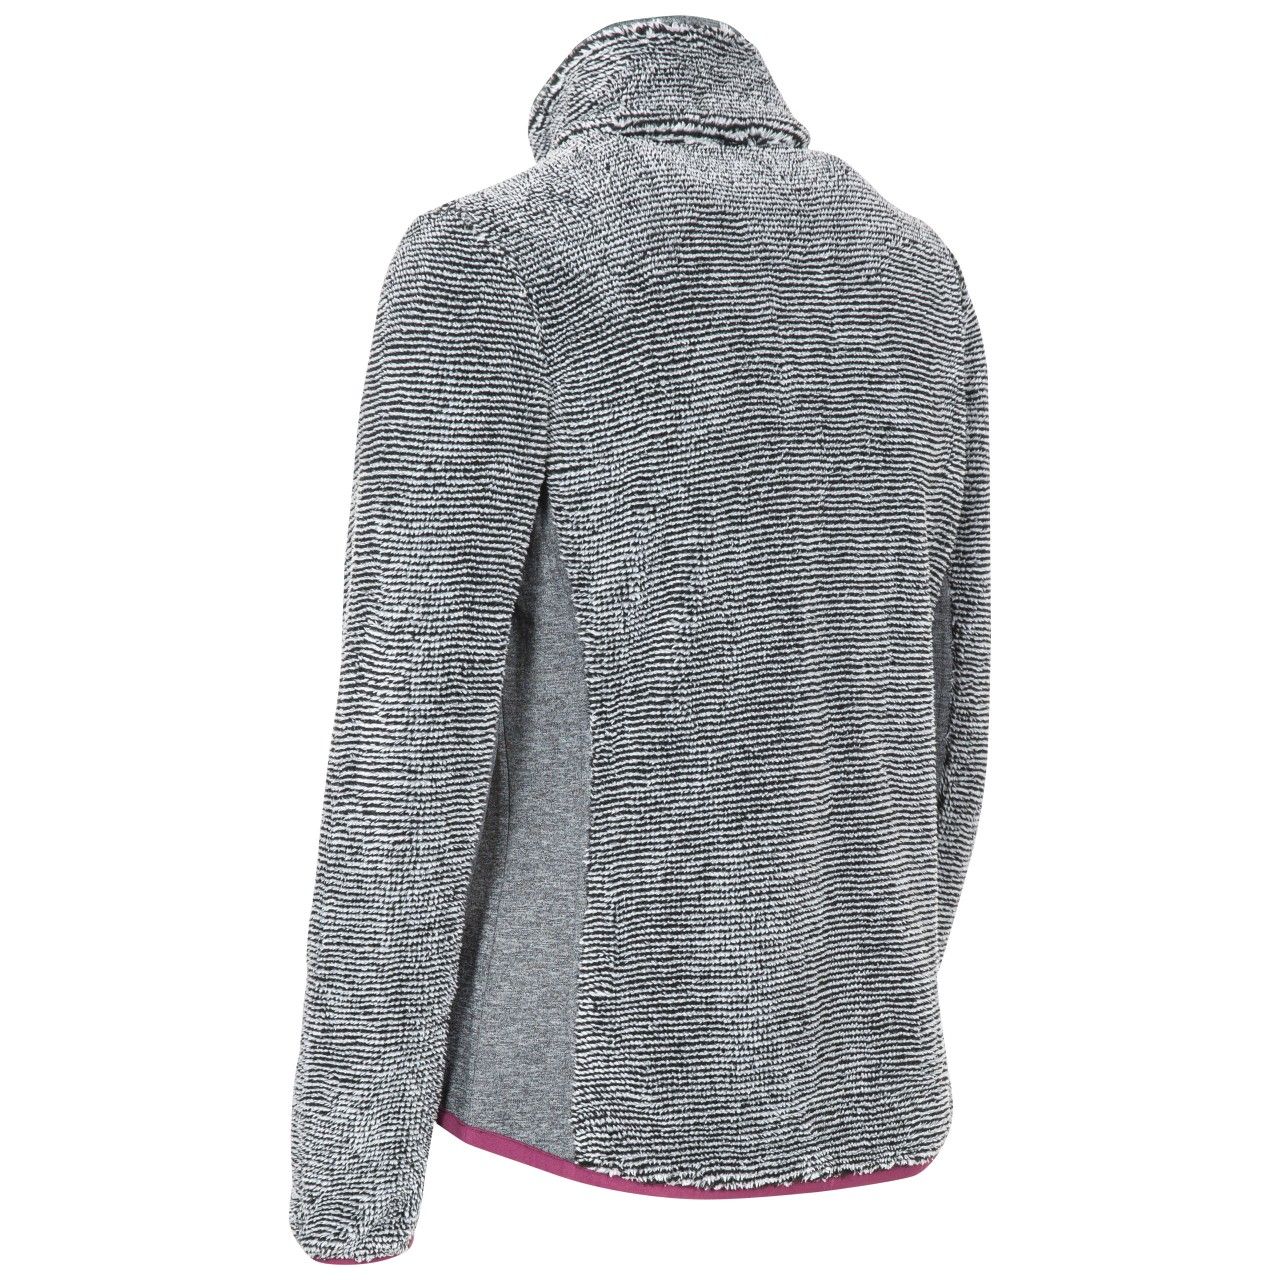 Stripe fleece. Stretch panels. 2 contrast zip pockets. Contrast stretch bindings. Airtrap. 360gsm. 100% Polyester fleece, 95% Polyester/5% Elastane stretch panel. Trespass Womens Chest Sizing (approx): XS/8 - 32in/81cm, S/10 - 34in/86cm, M/12 - 36in/91.4cm, L/14 - 38in/96.5cm, XL/16 - 40in/101.5cm, XXL/18 - 42in/106.5cm.